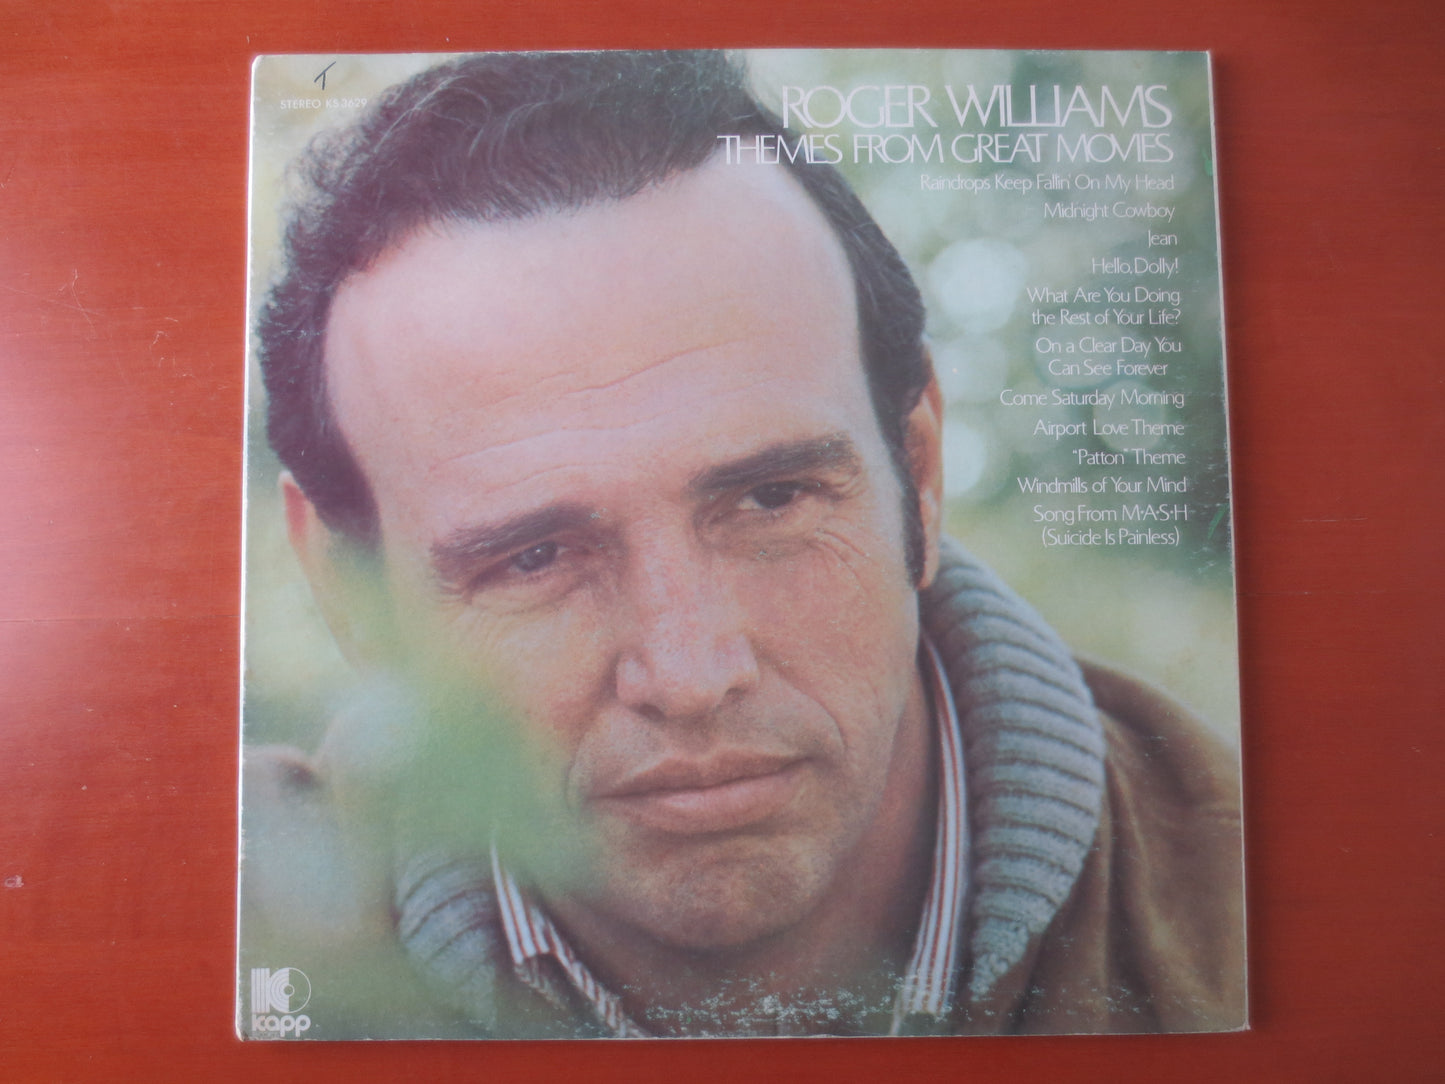 ROGER WILLIAMS, Themes From GREAT Movies, Roger Williams Album, Roger Williams Music, Vintage Vinyl, Records, 1970 Records